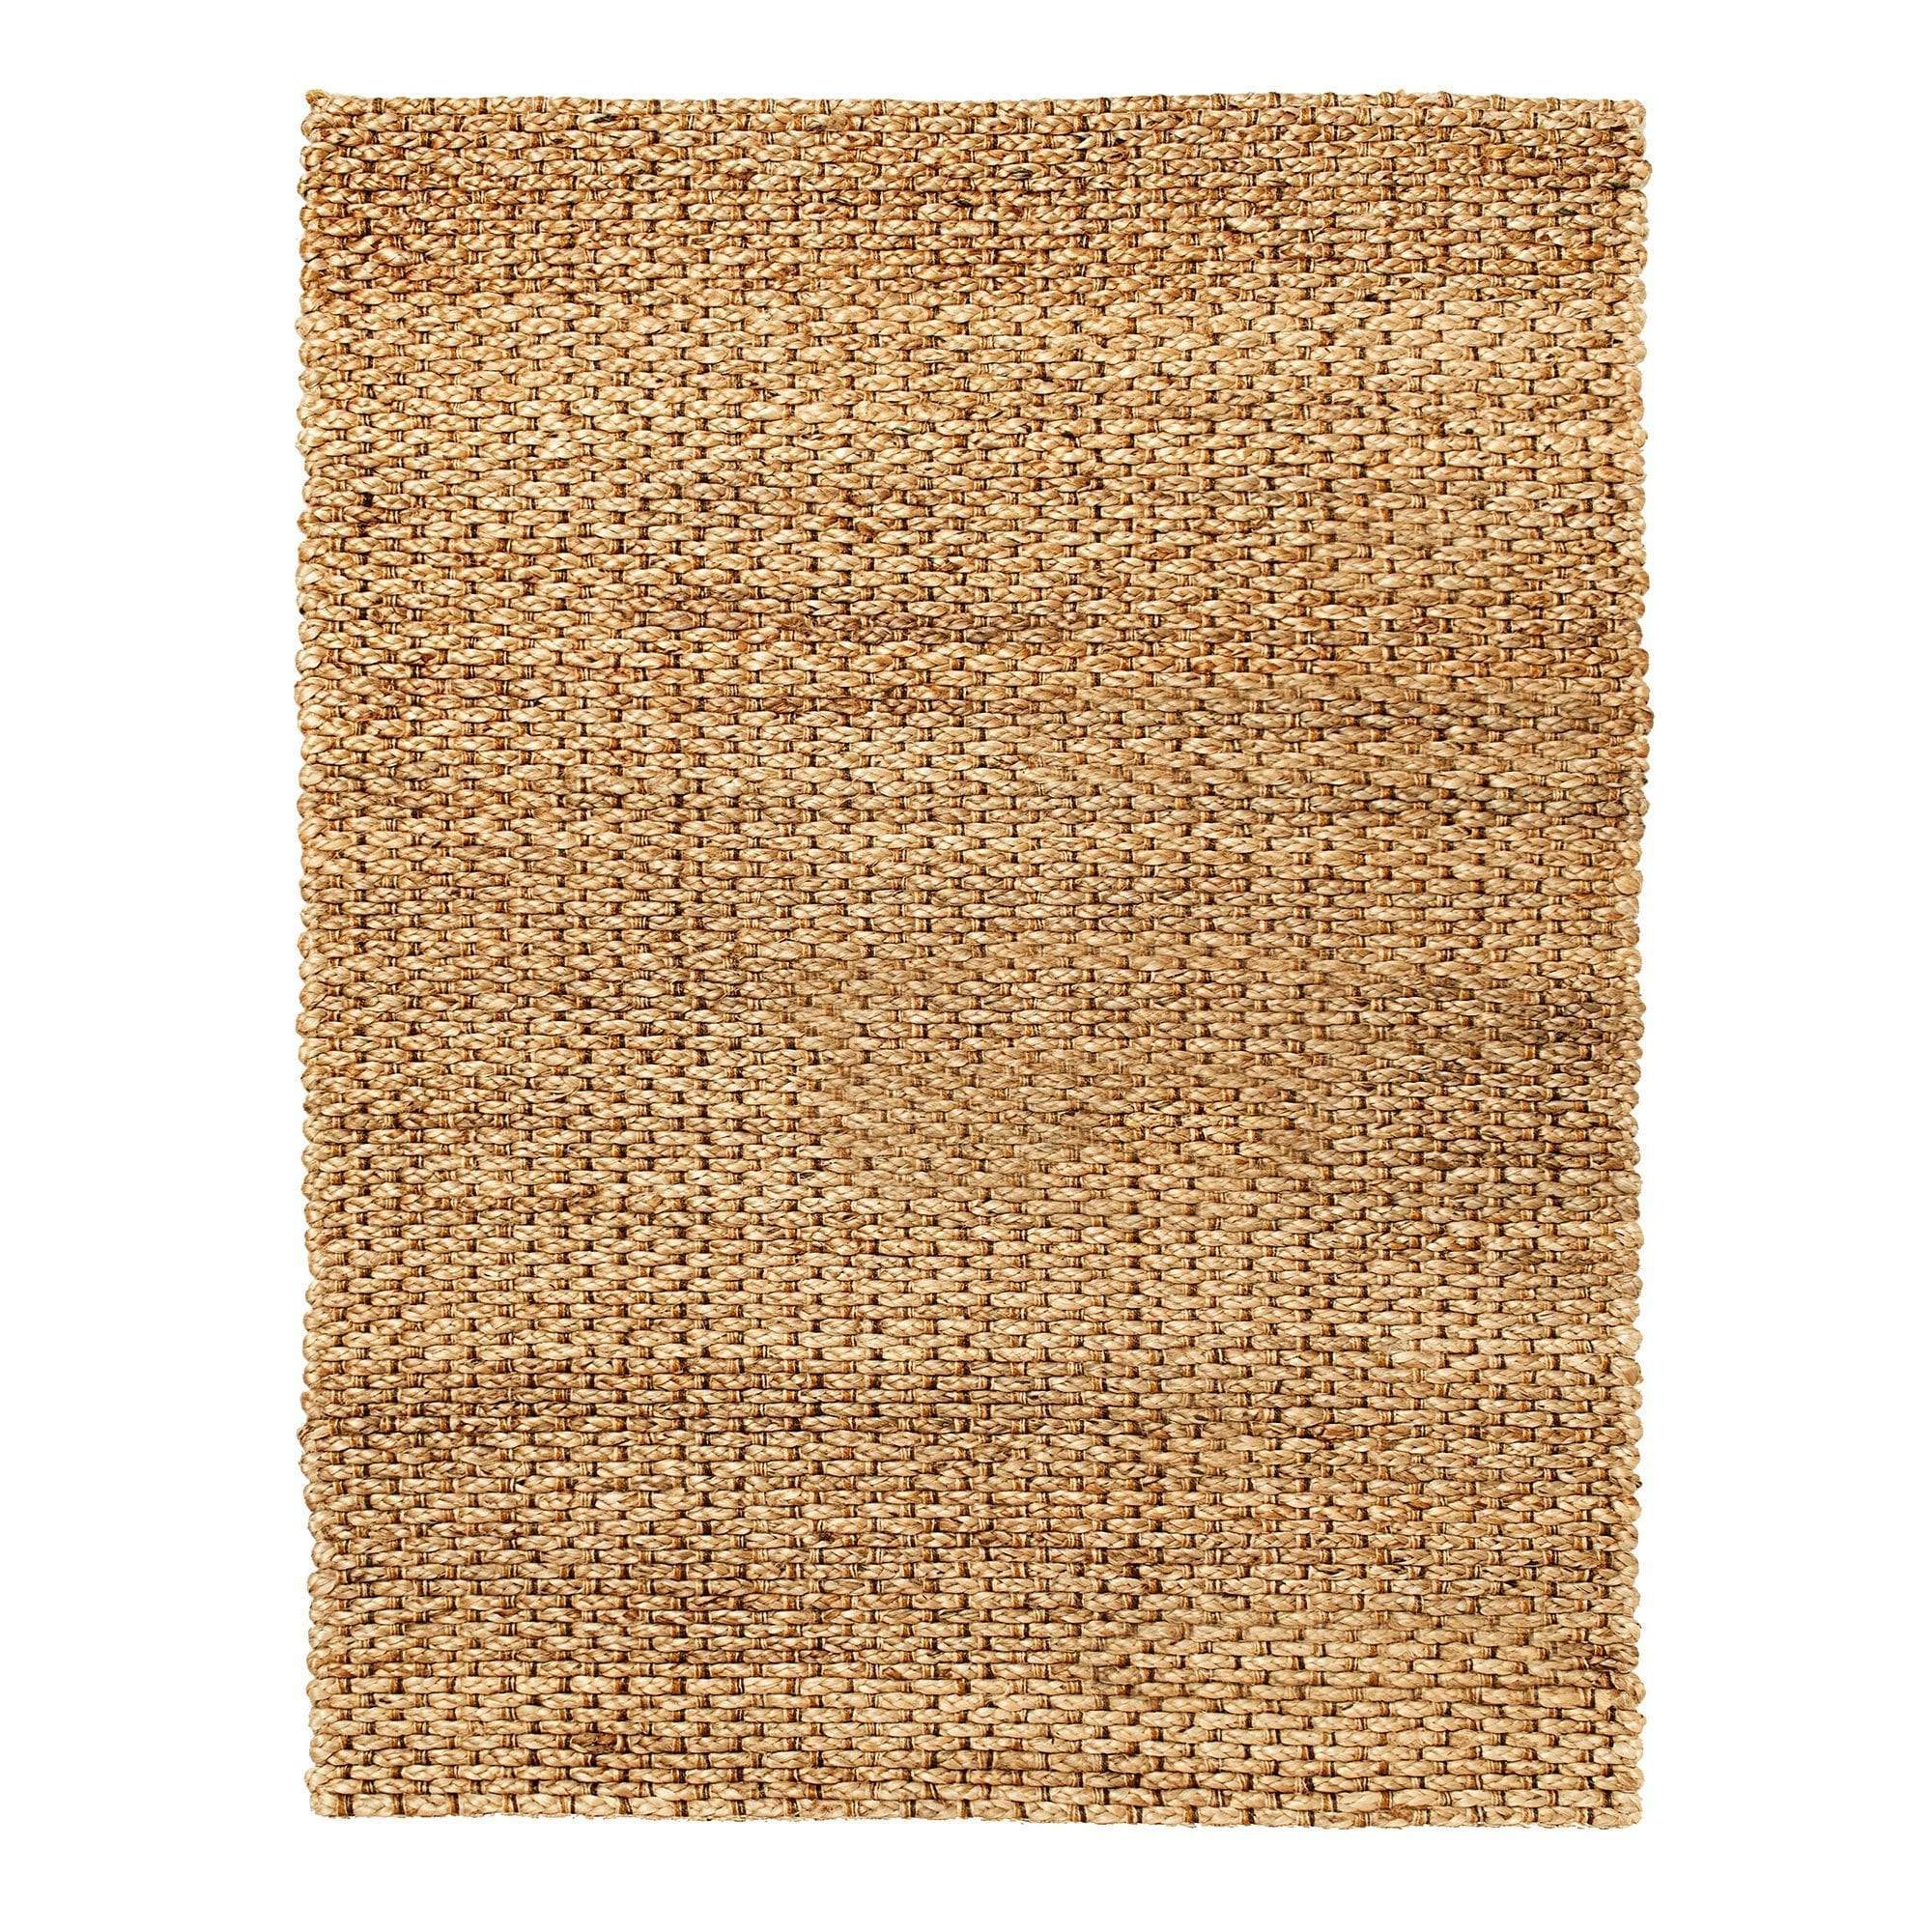 The Natural - Hand Woven Jute Rug 9x12